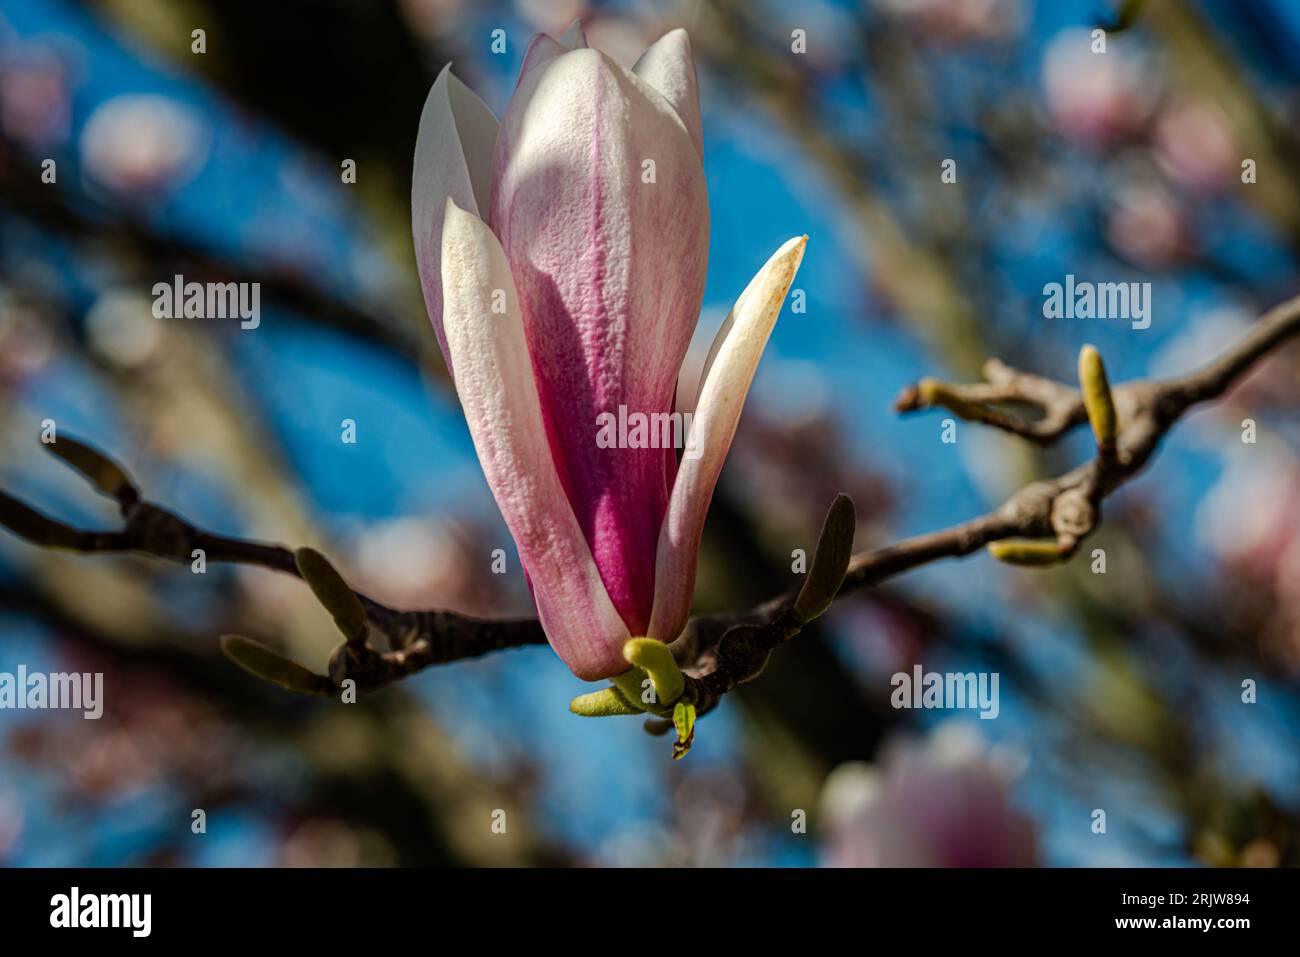 Magnolia flowering time, close-up photography Stock Photo